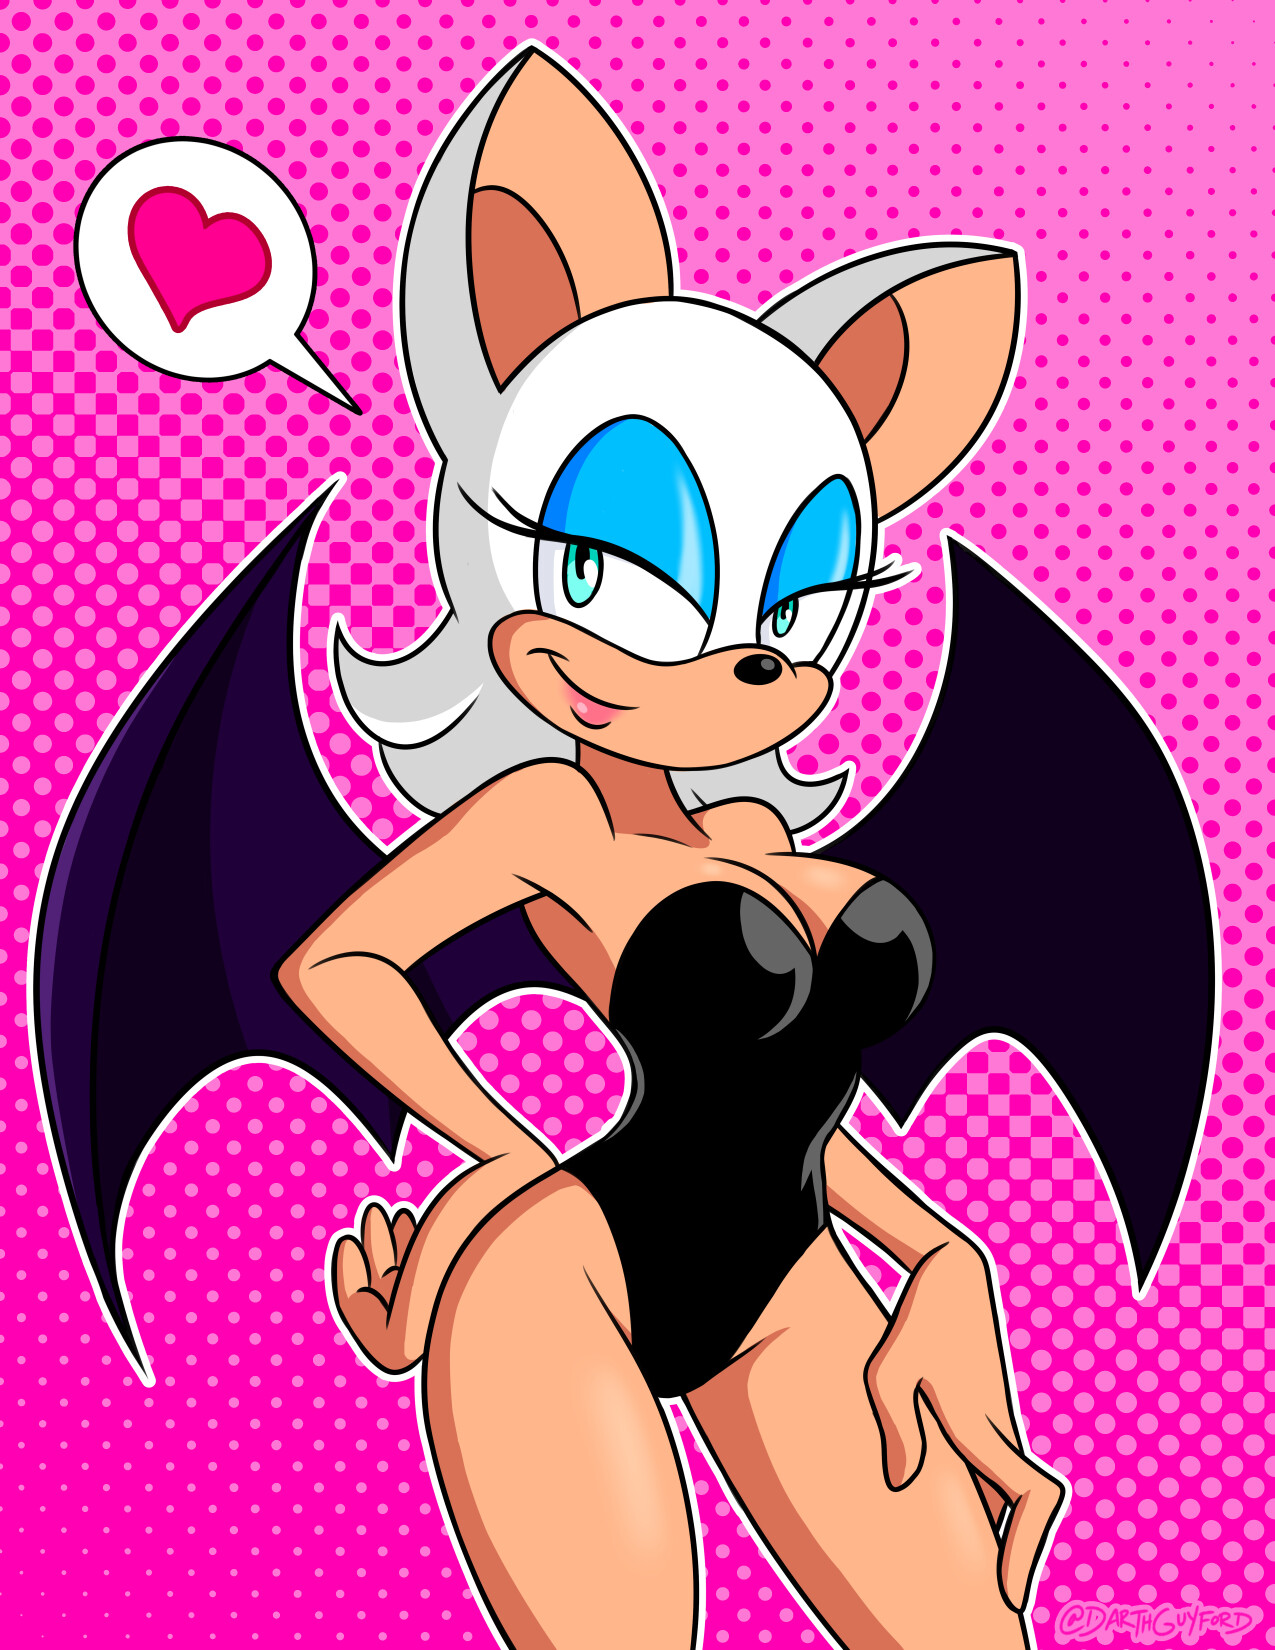 Pin-up of Rouge the Bat from Sonic the Hedgehog Drawn in 2019.